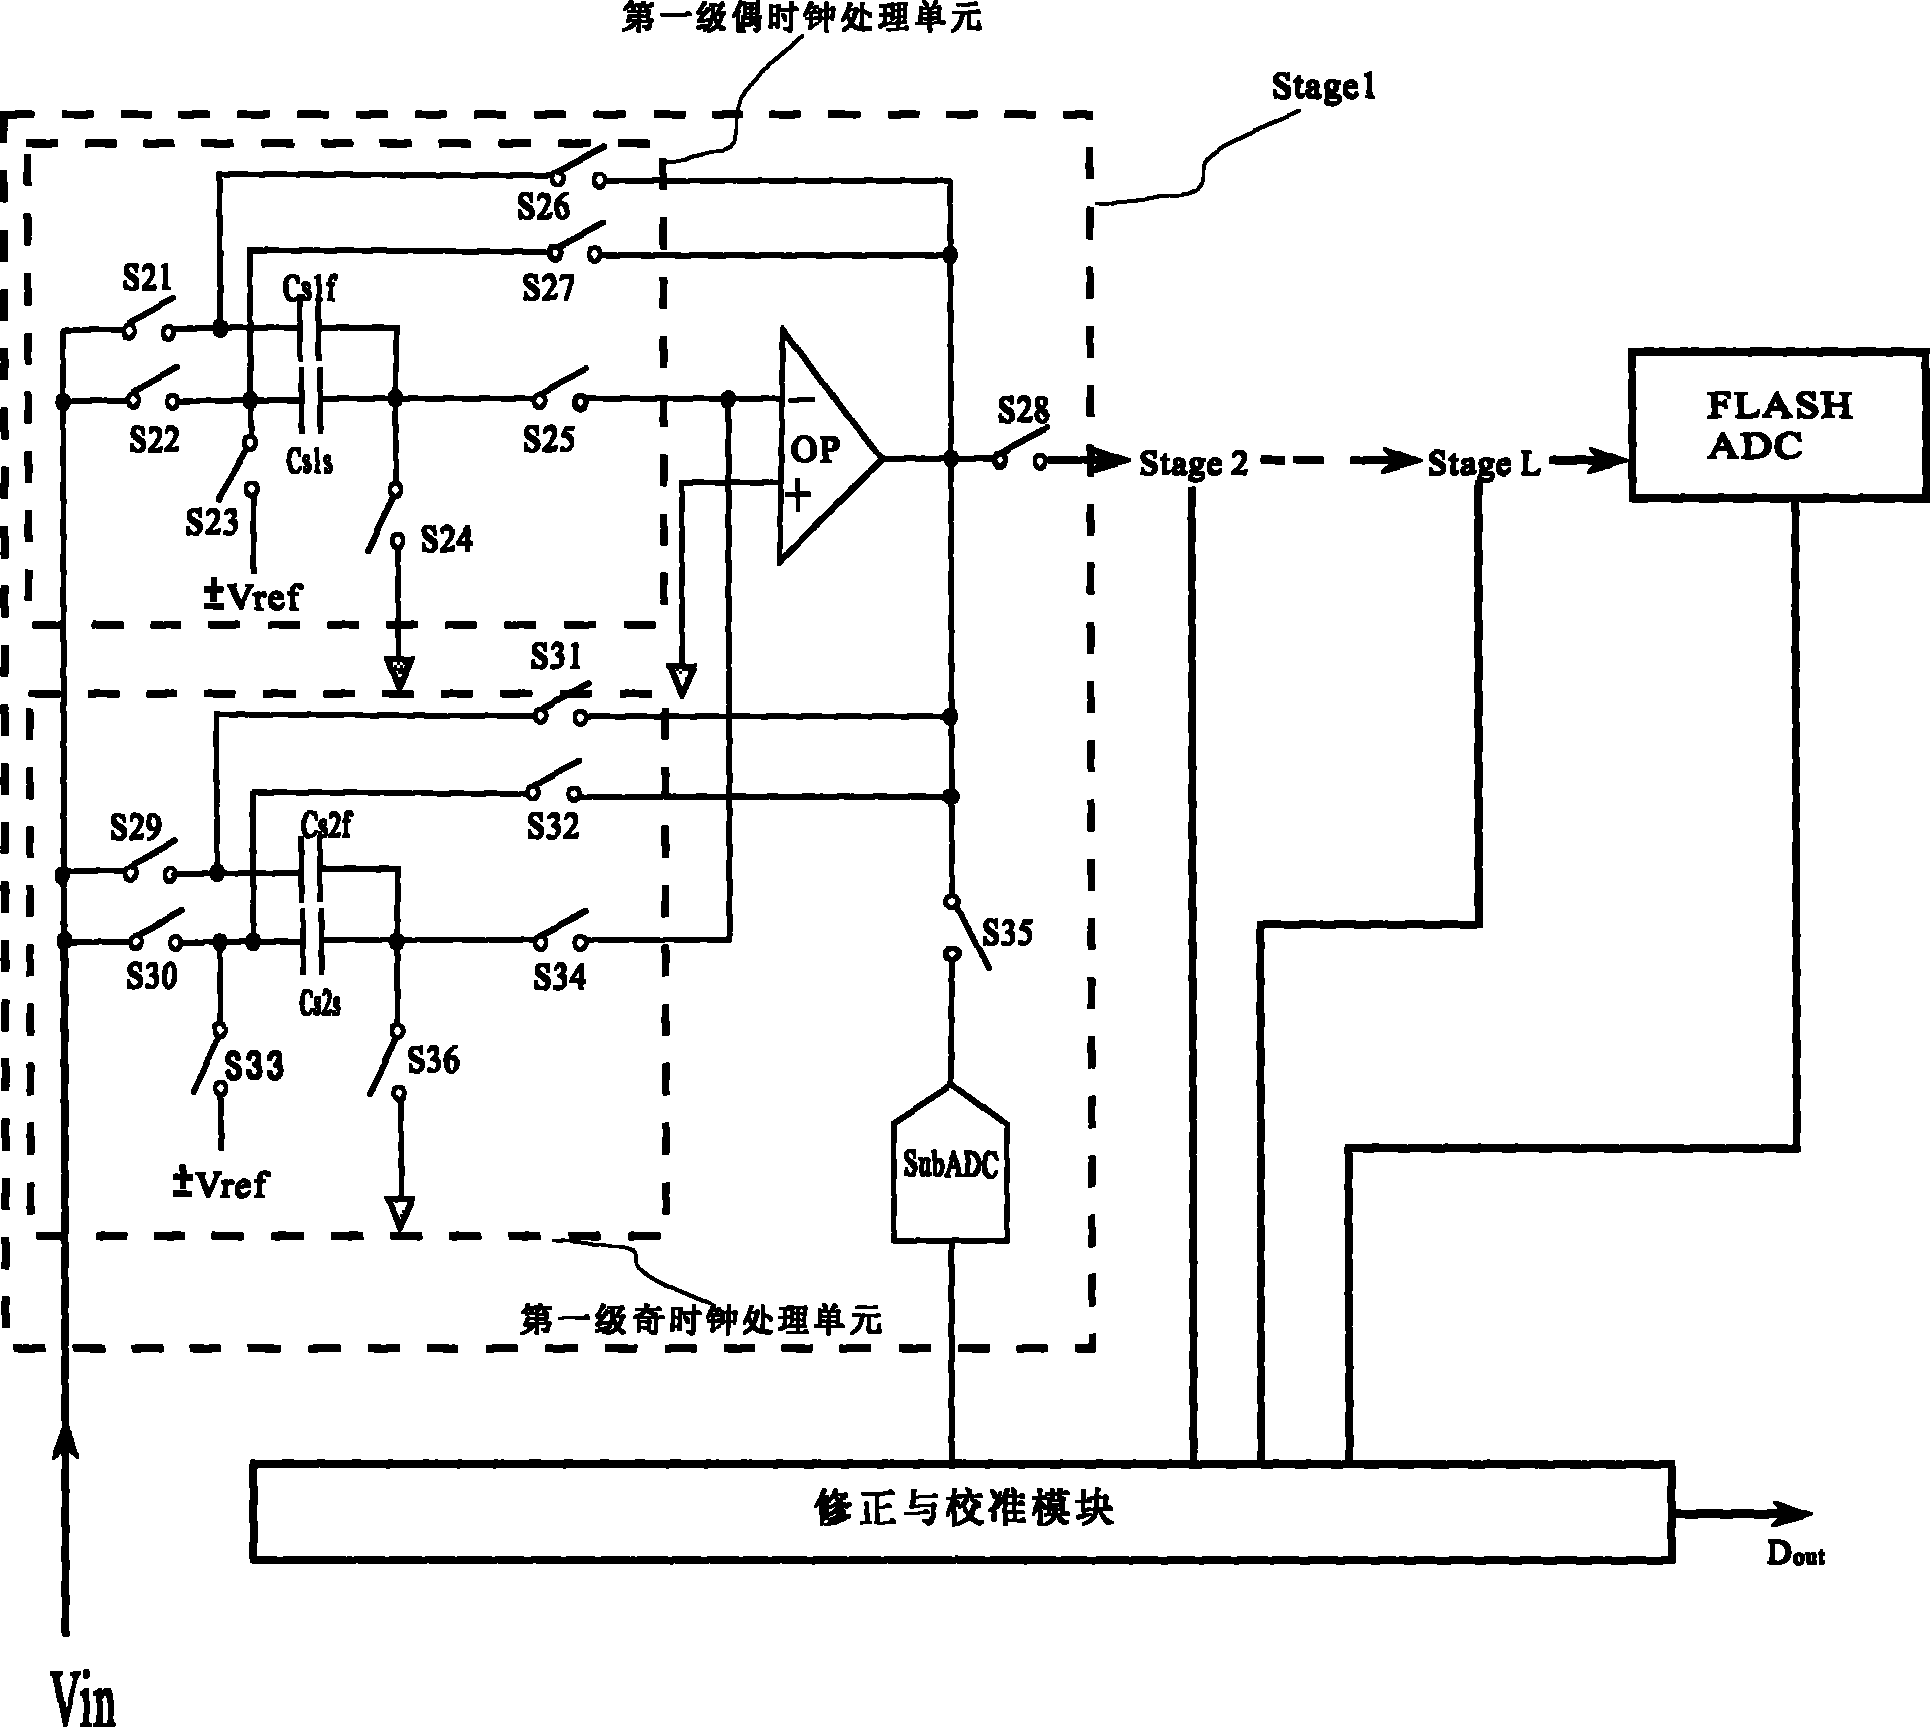 Analog-digital converter with sample hold and MDAC (Multiplying Digital-to-Analog Conversion) sharing capacitance and operational amplifier in time sharing way